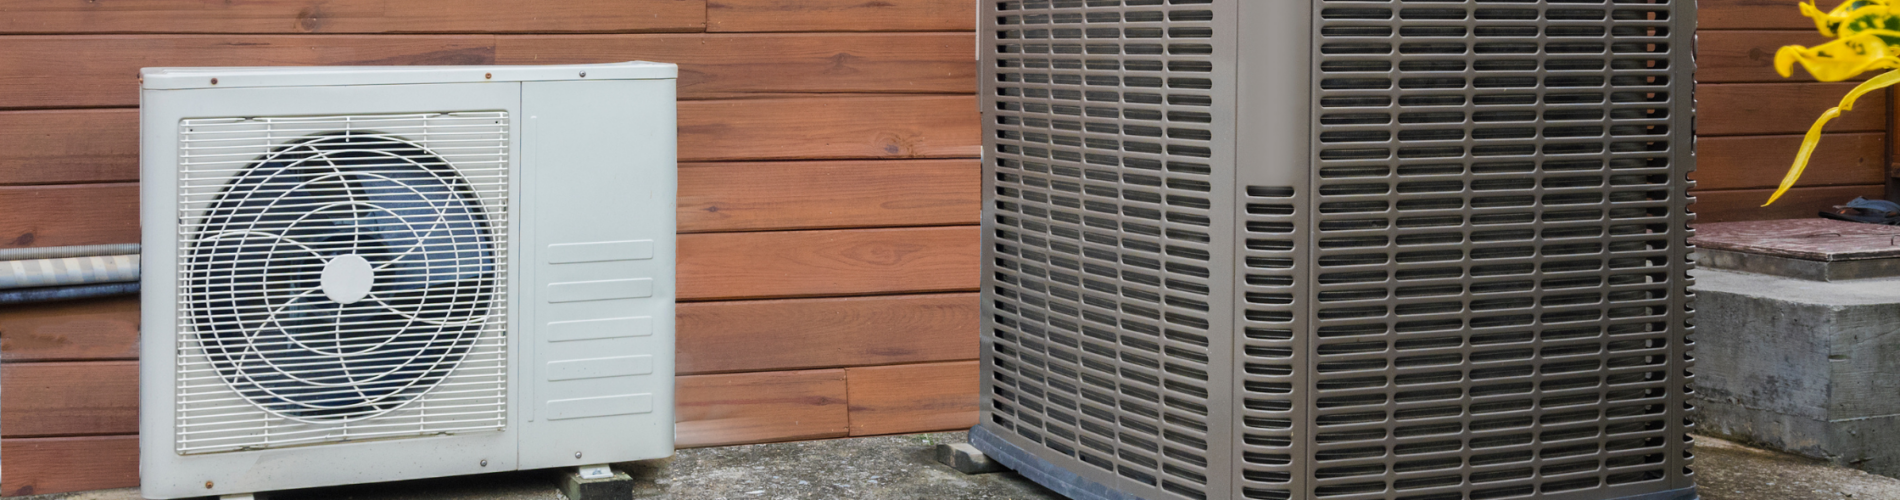 Bryant Legacy heat pumps combine value and function